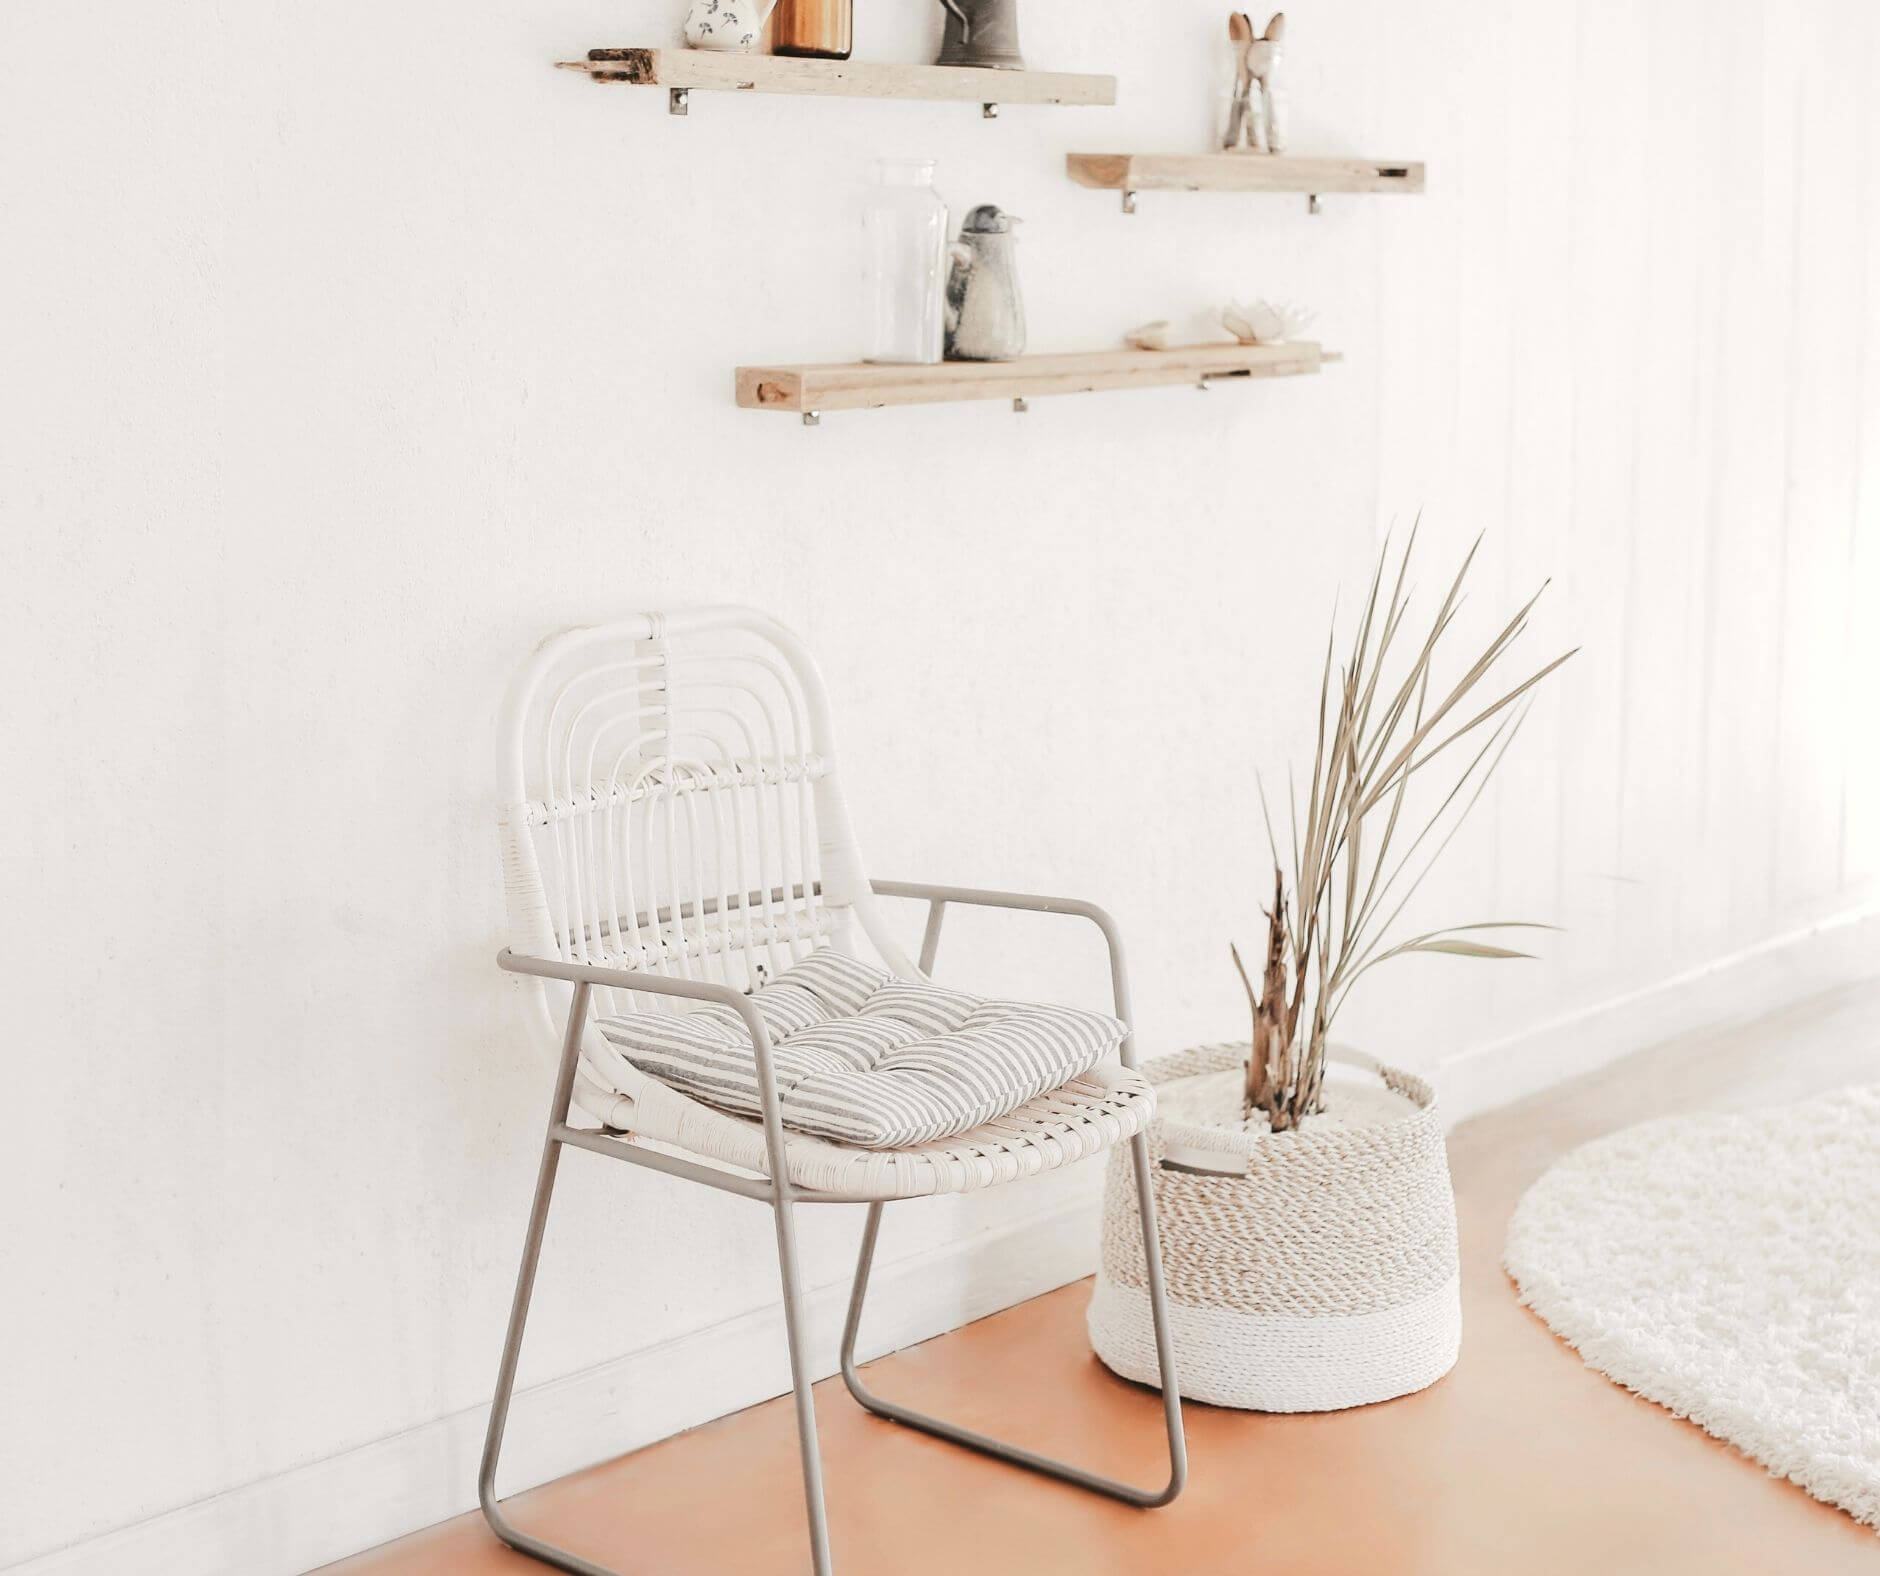 A minimalist room with a white metal chair, striped cushion, wooden shelves, and a potted plant, designed by Studio Anansi.